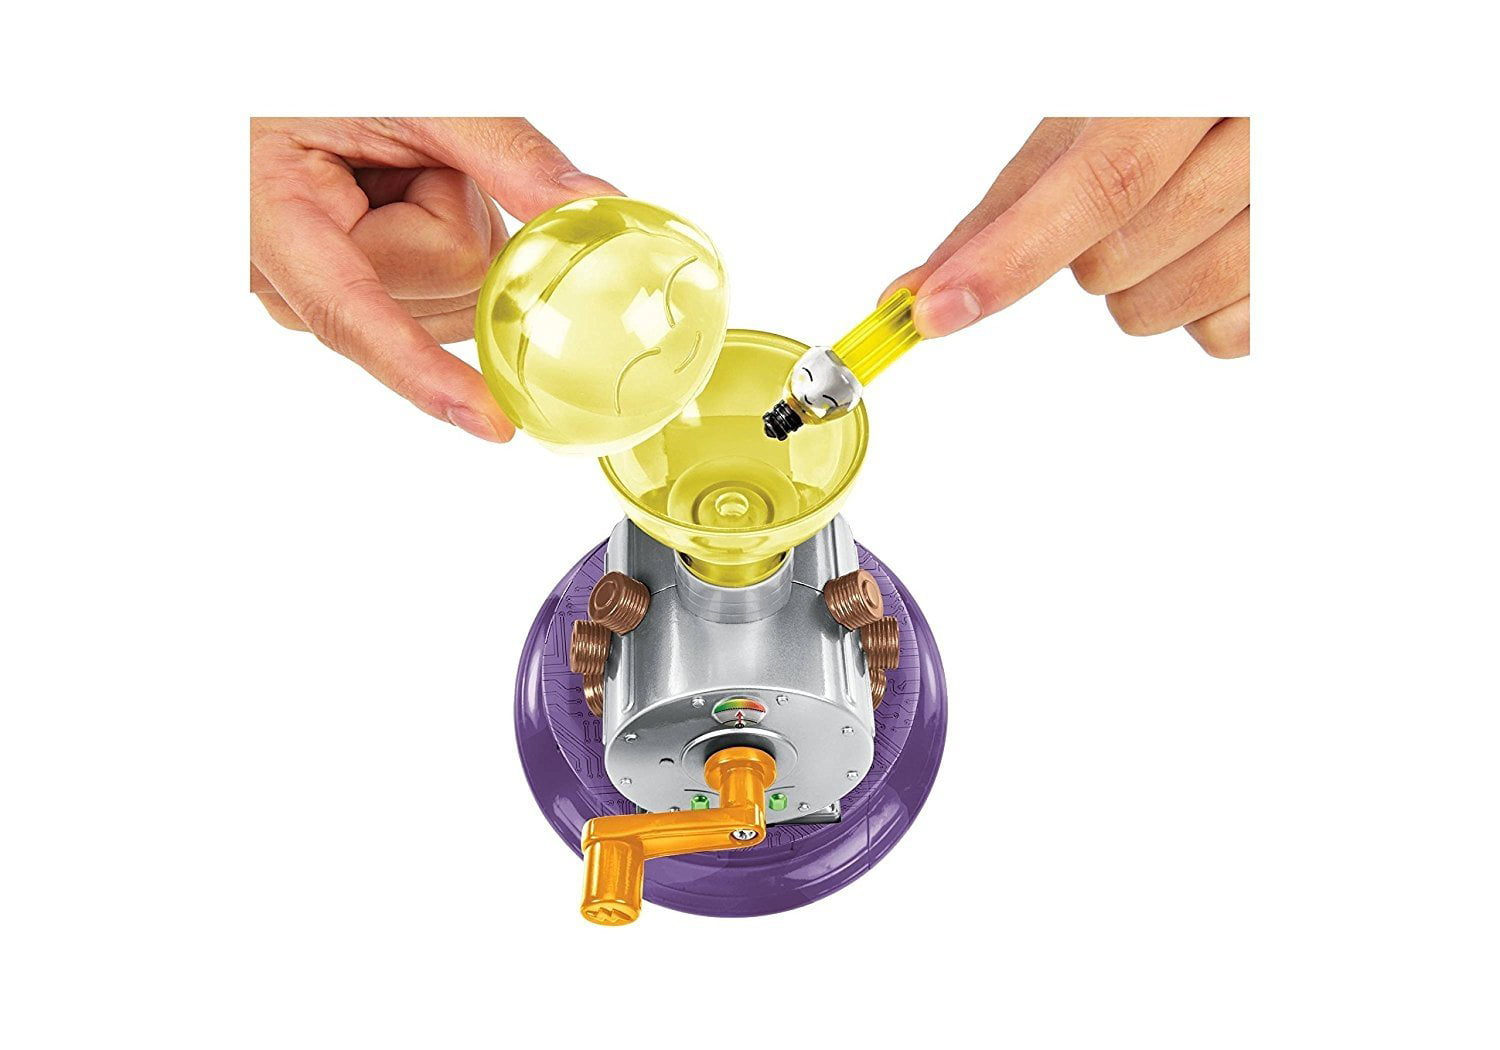 Basher Science Light Illuminator Playlet STEAM Educational Toy FREE SHIPPING 